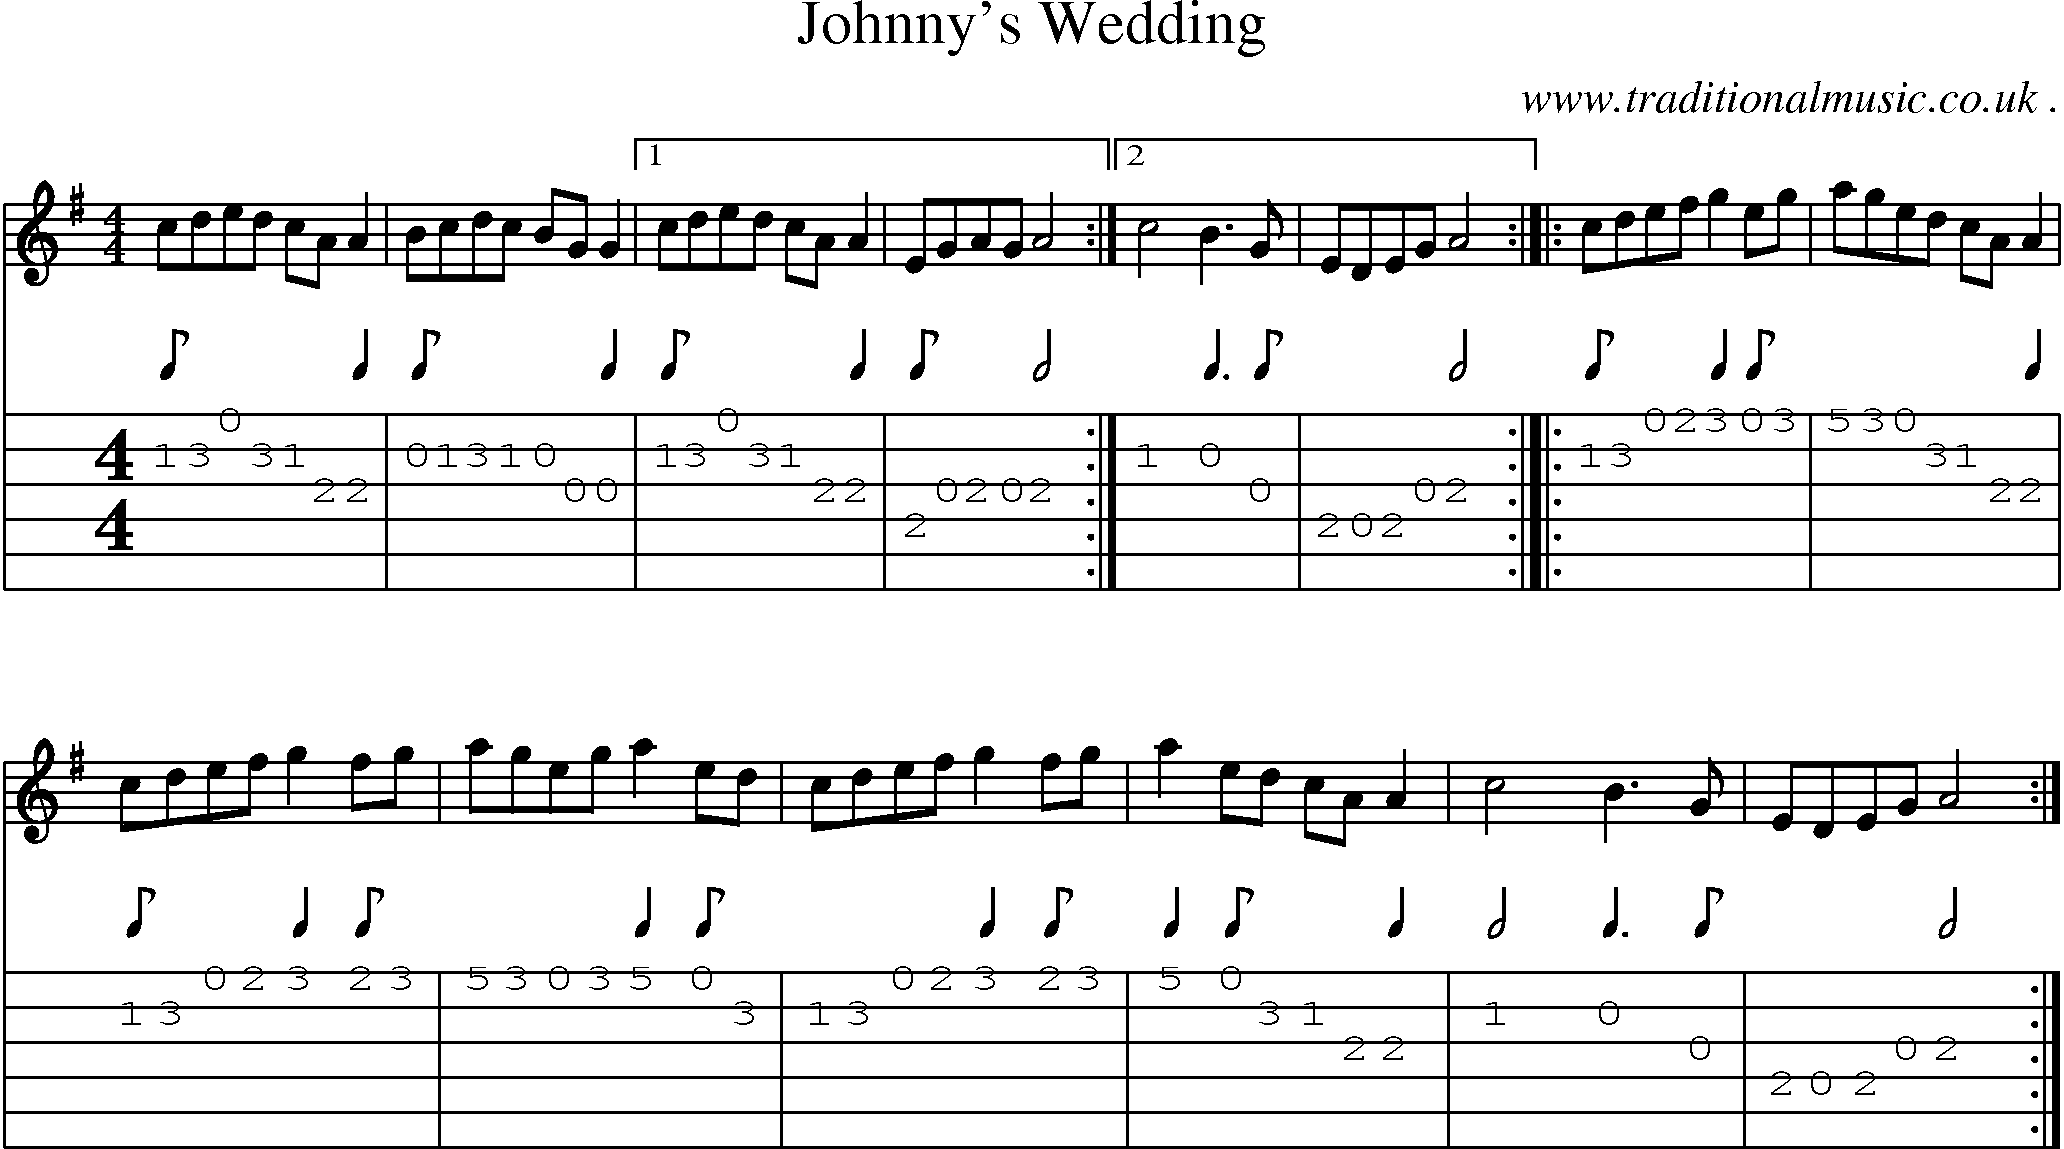 Sheet-Music and Guitar Tabs for Johnnys Wedding